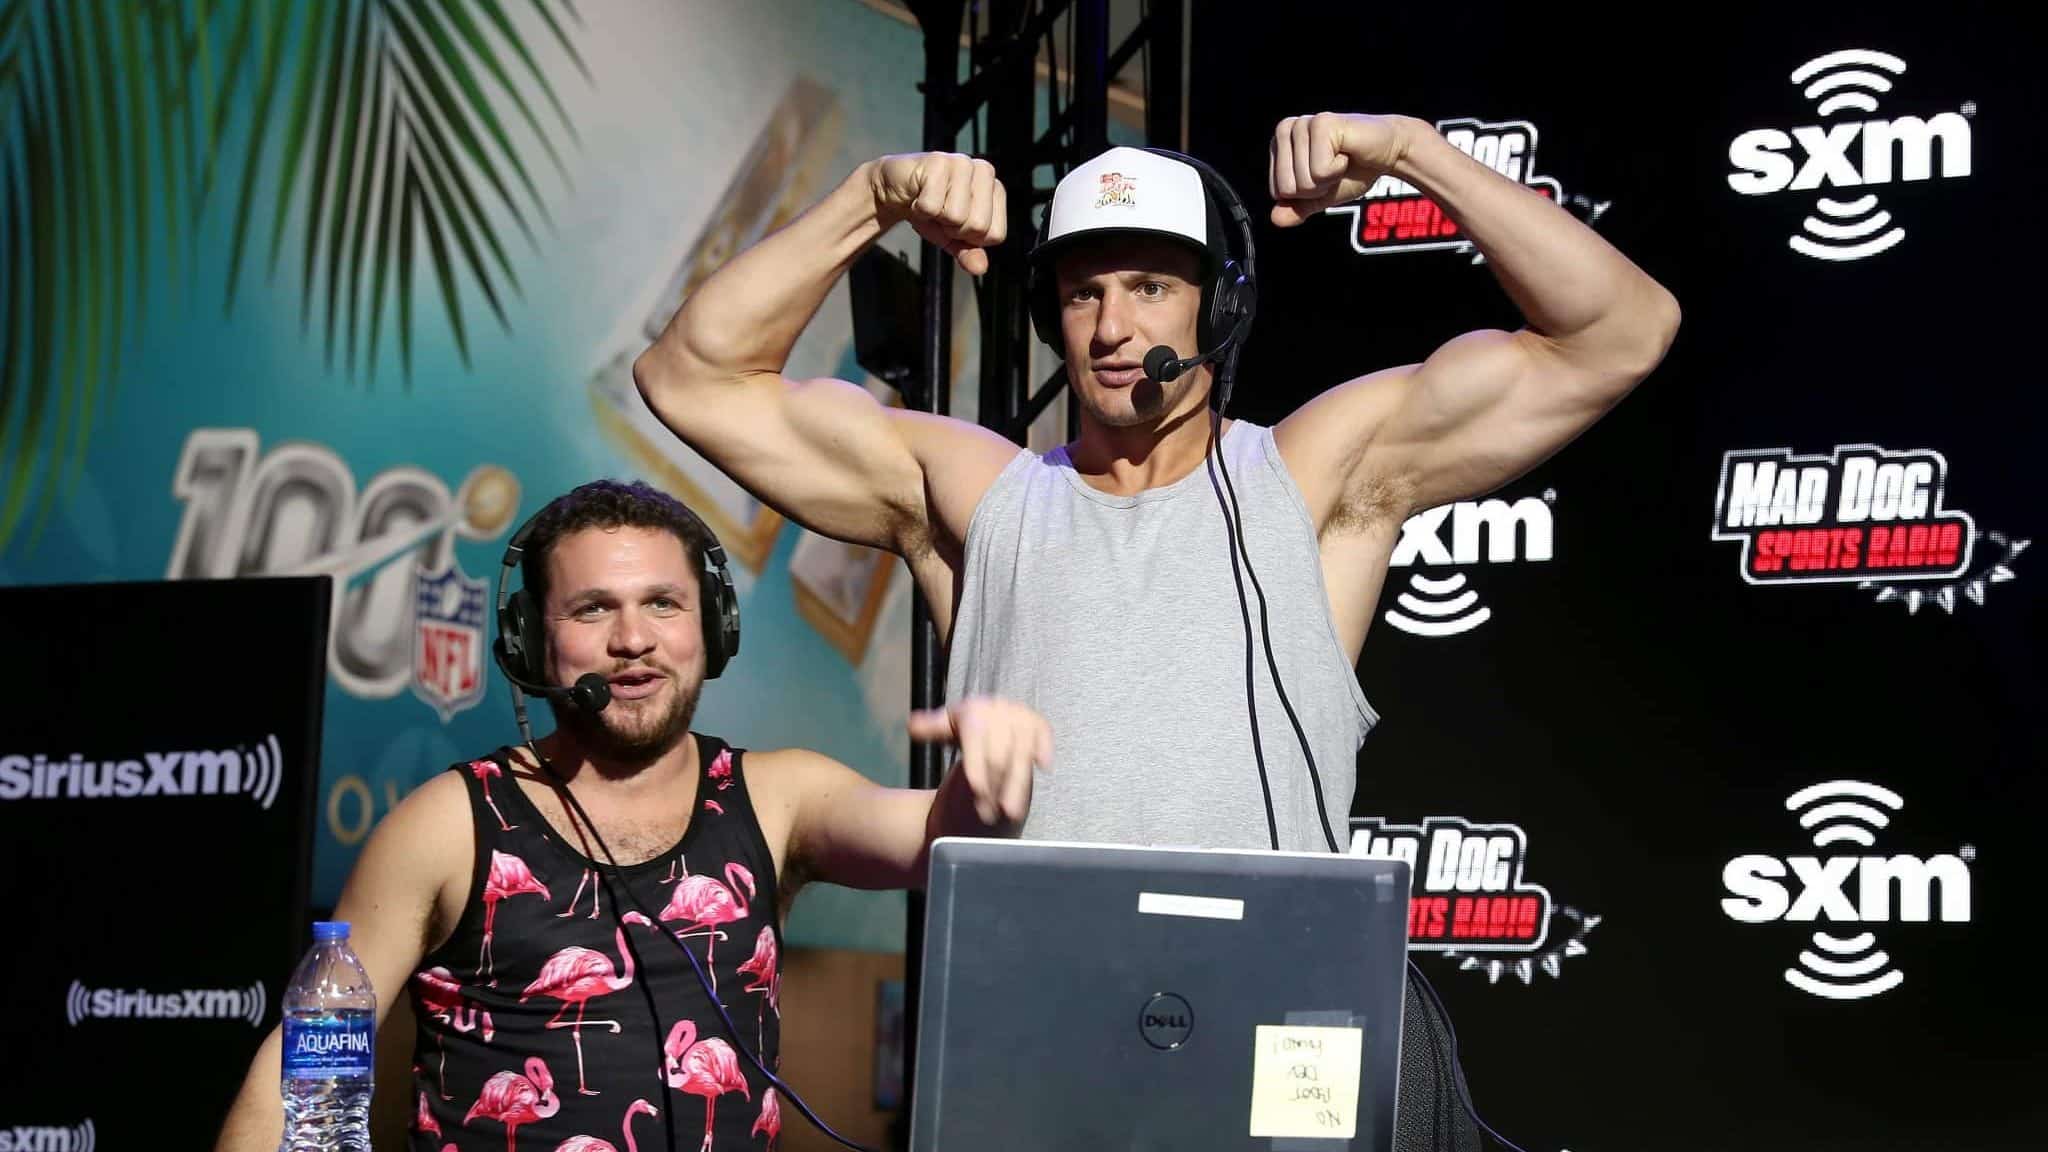 MIAMI, FLORIDA - JANUARY 31: (L-R) SiriusXM host Mike Babchik and former NFL player Rob Gronkowski speak onstage during day 3 of SiriusXM at Super Bowl LIV on January 31, 2020 in Miami, Florida.